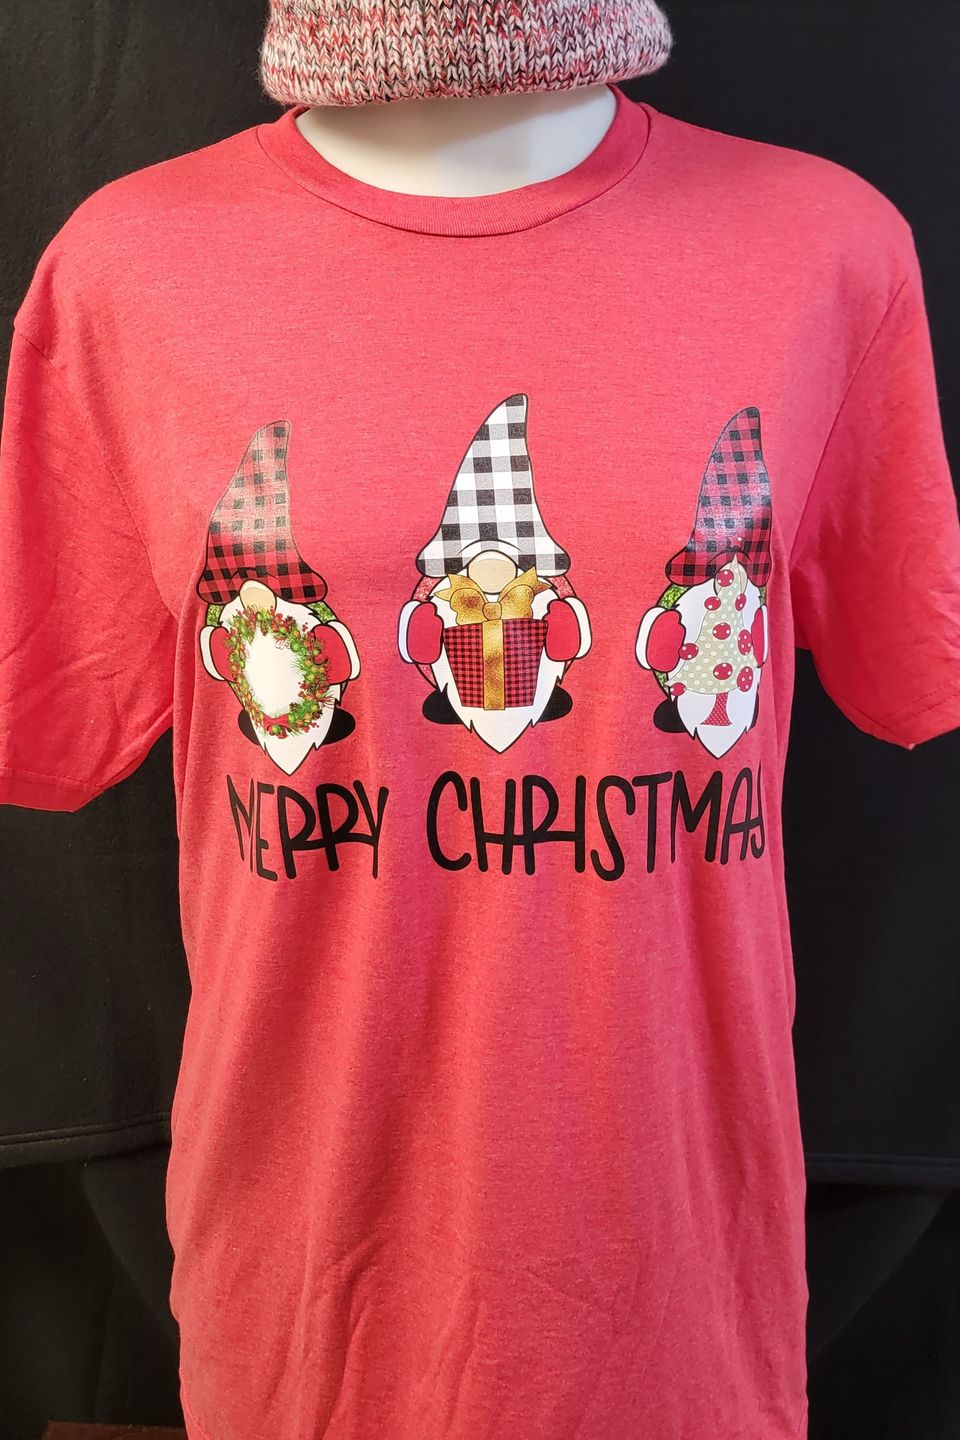 DTF direct to film example - Merry Christmas t-shirt